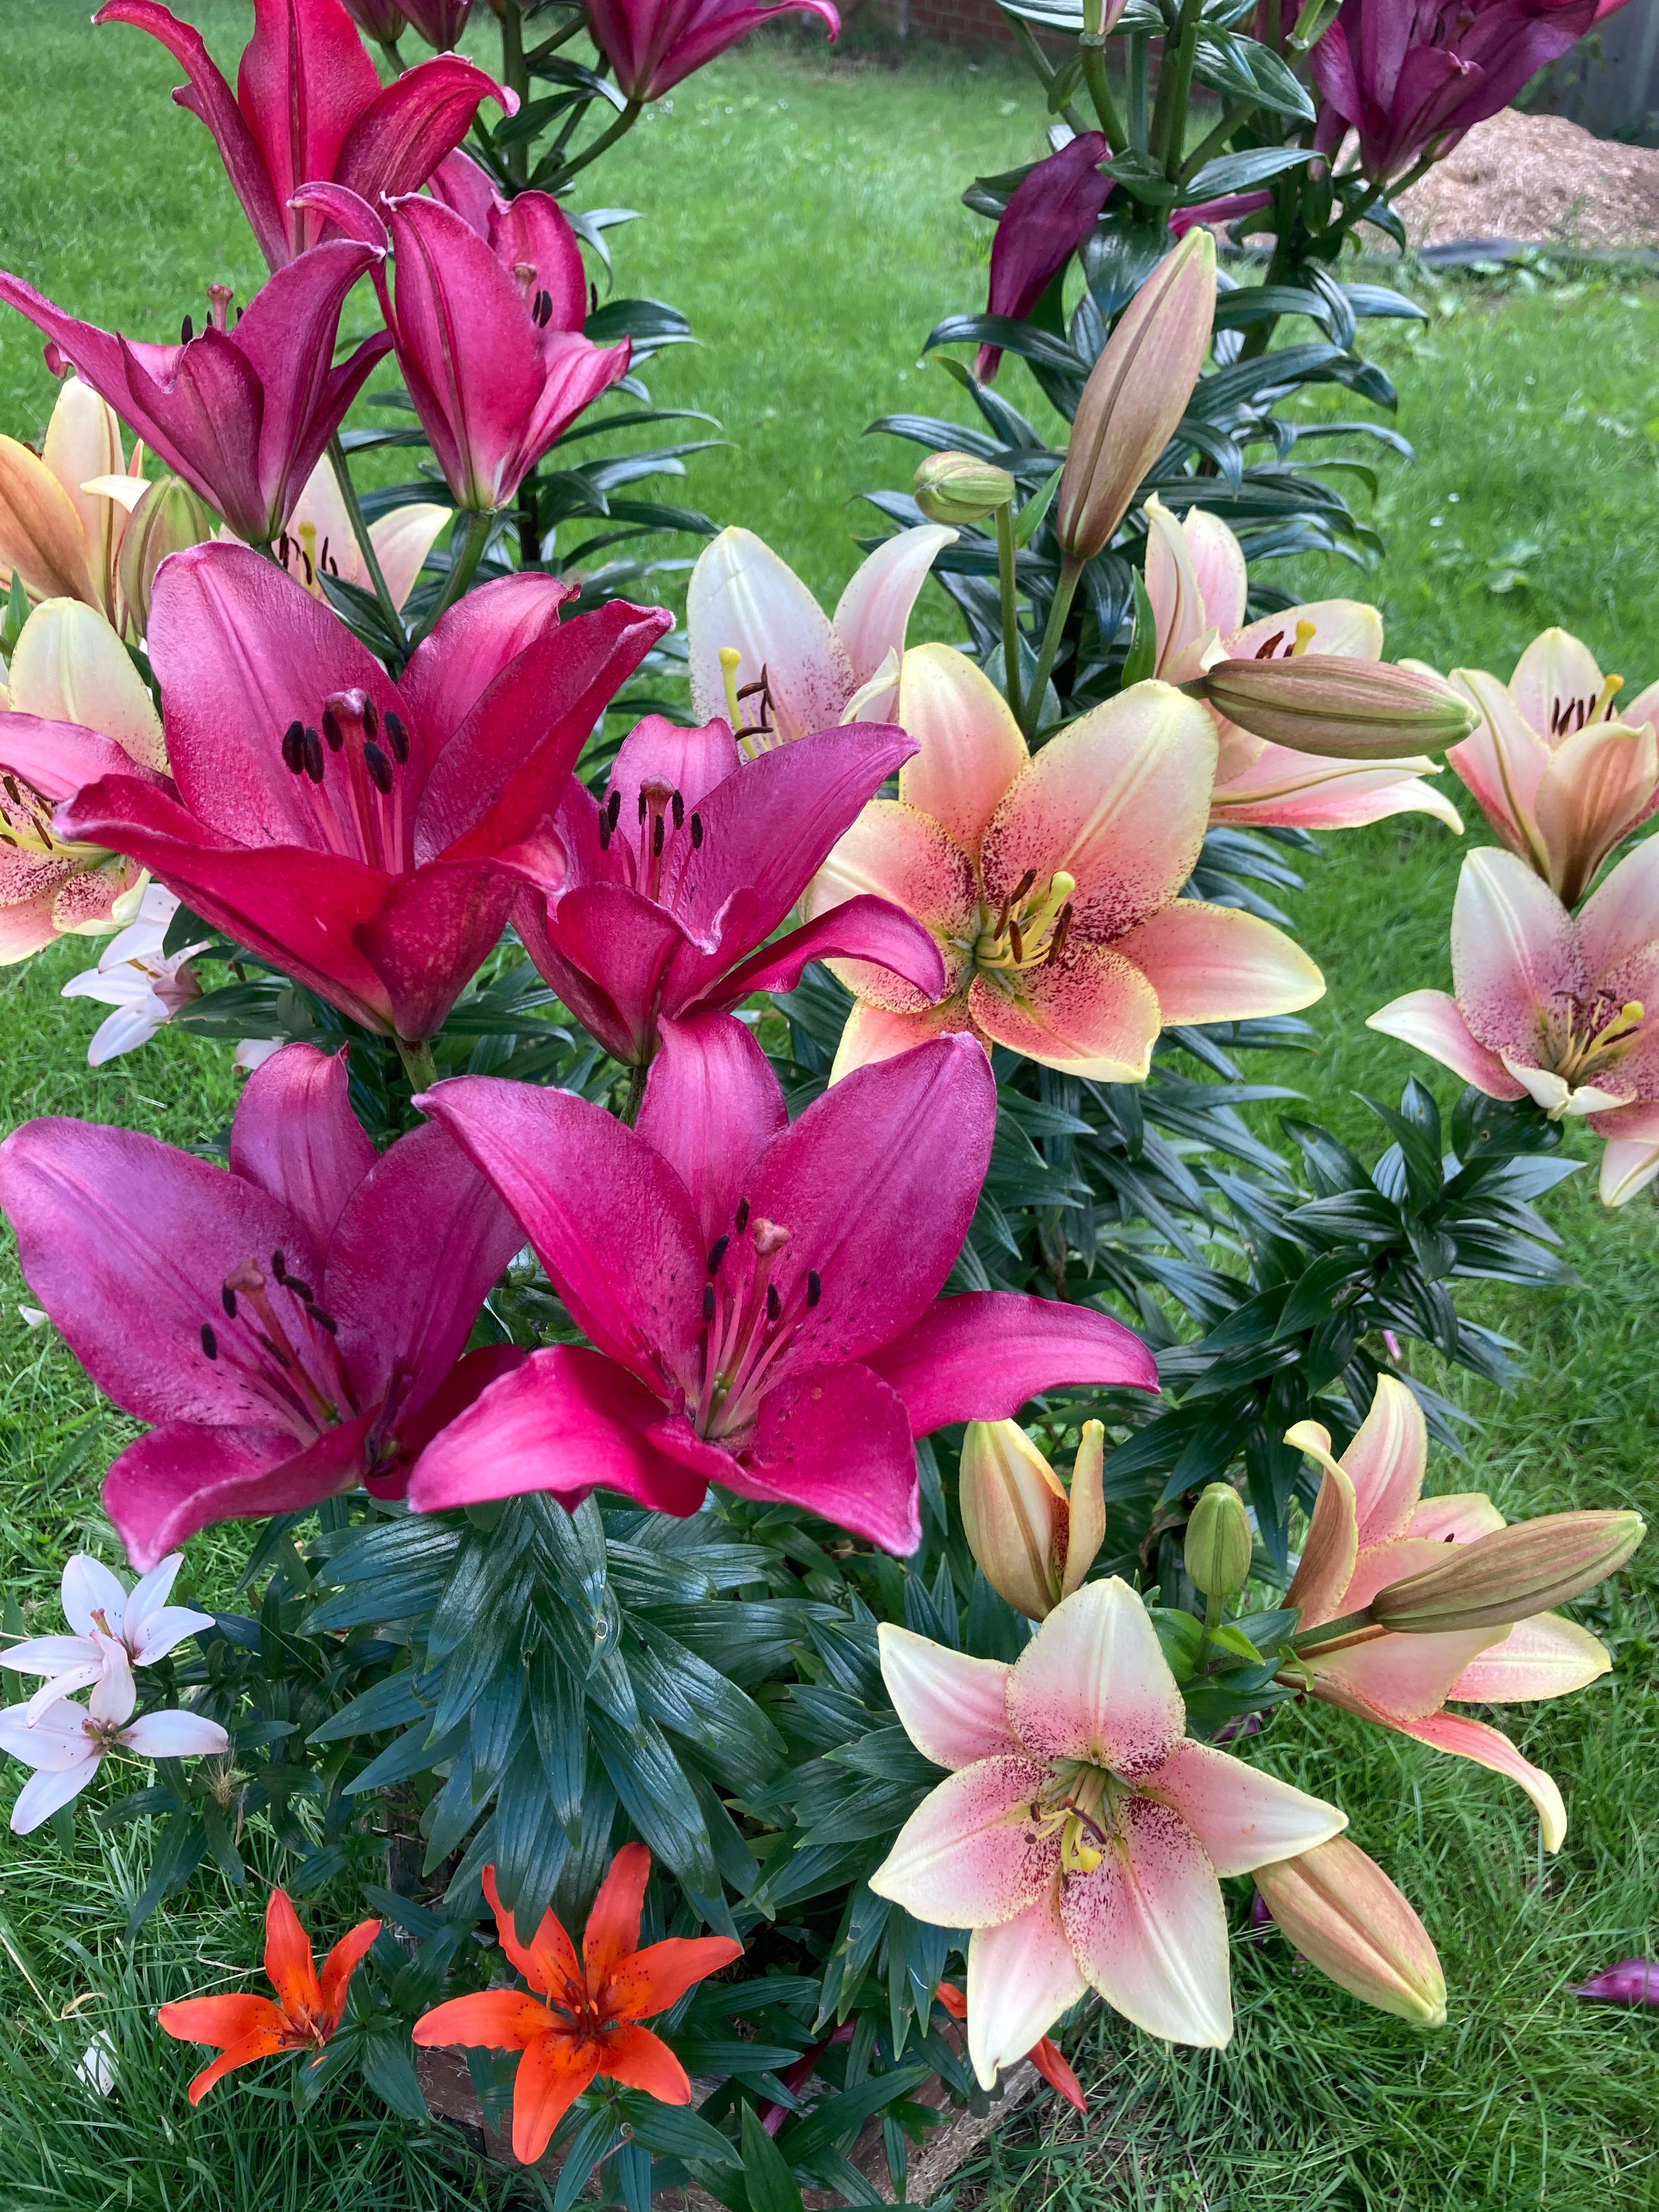 2 x Scented Lilies (Mixed Colours) (Bulbs) (Free UK postage)